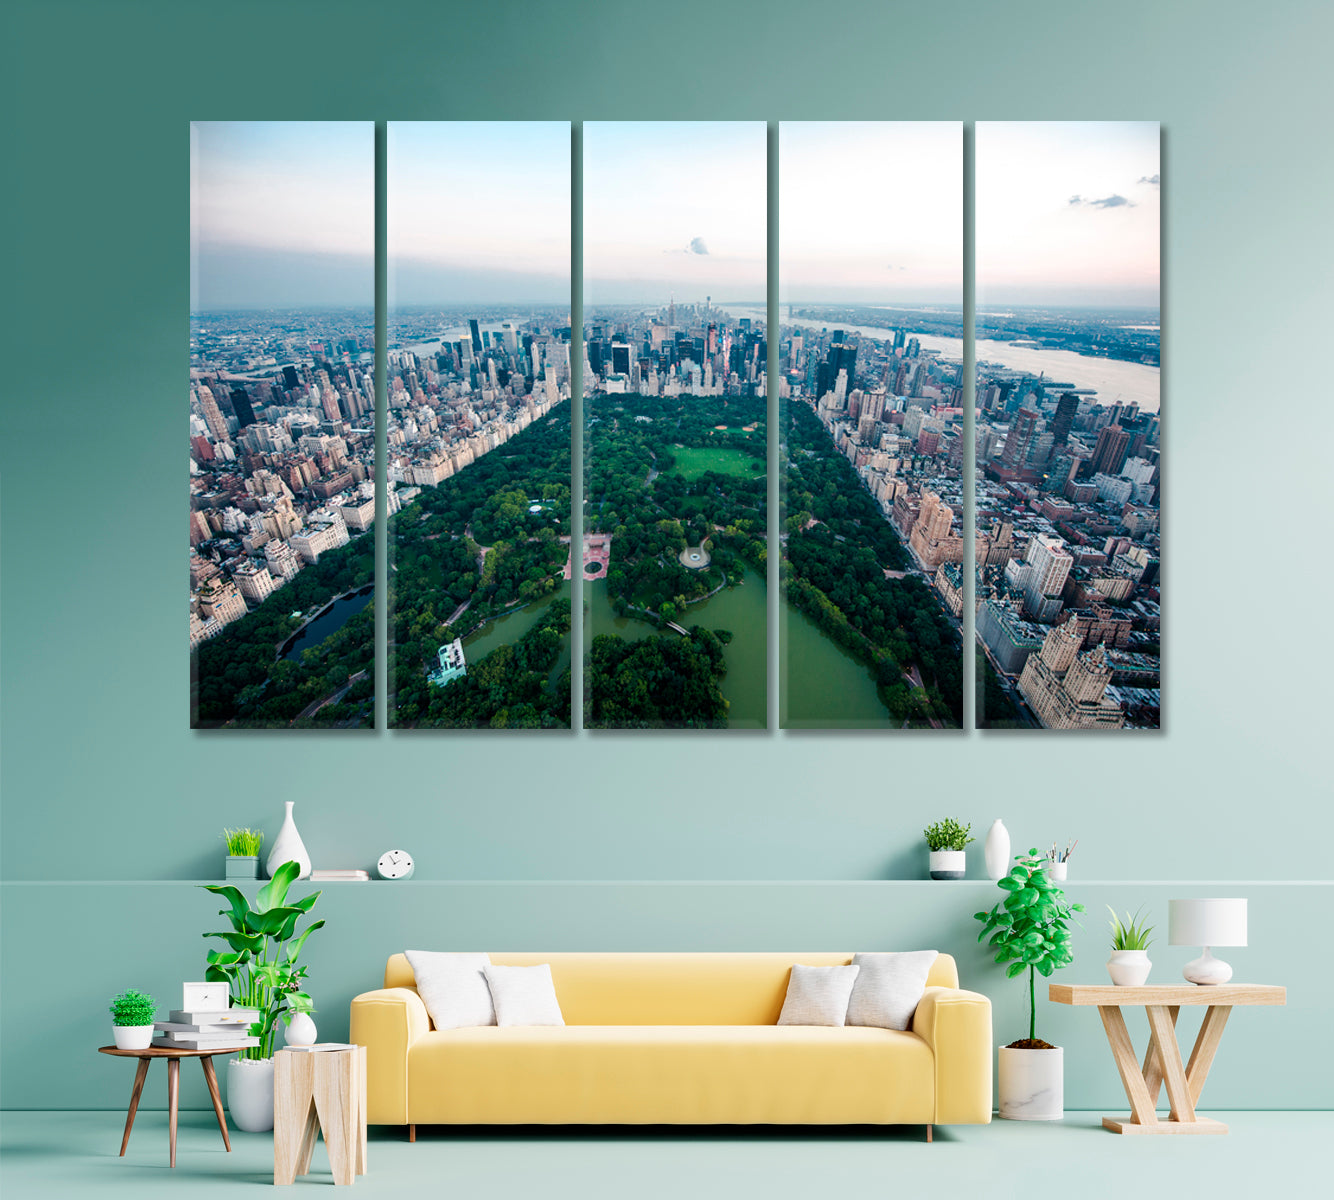 Central Park New York City Canvas Print ArtLexy 5 Panels 36"x24" inches 